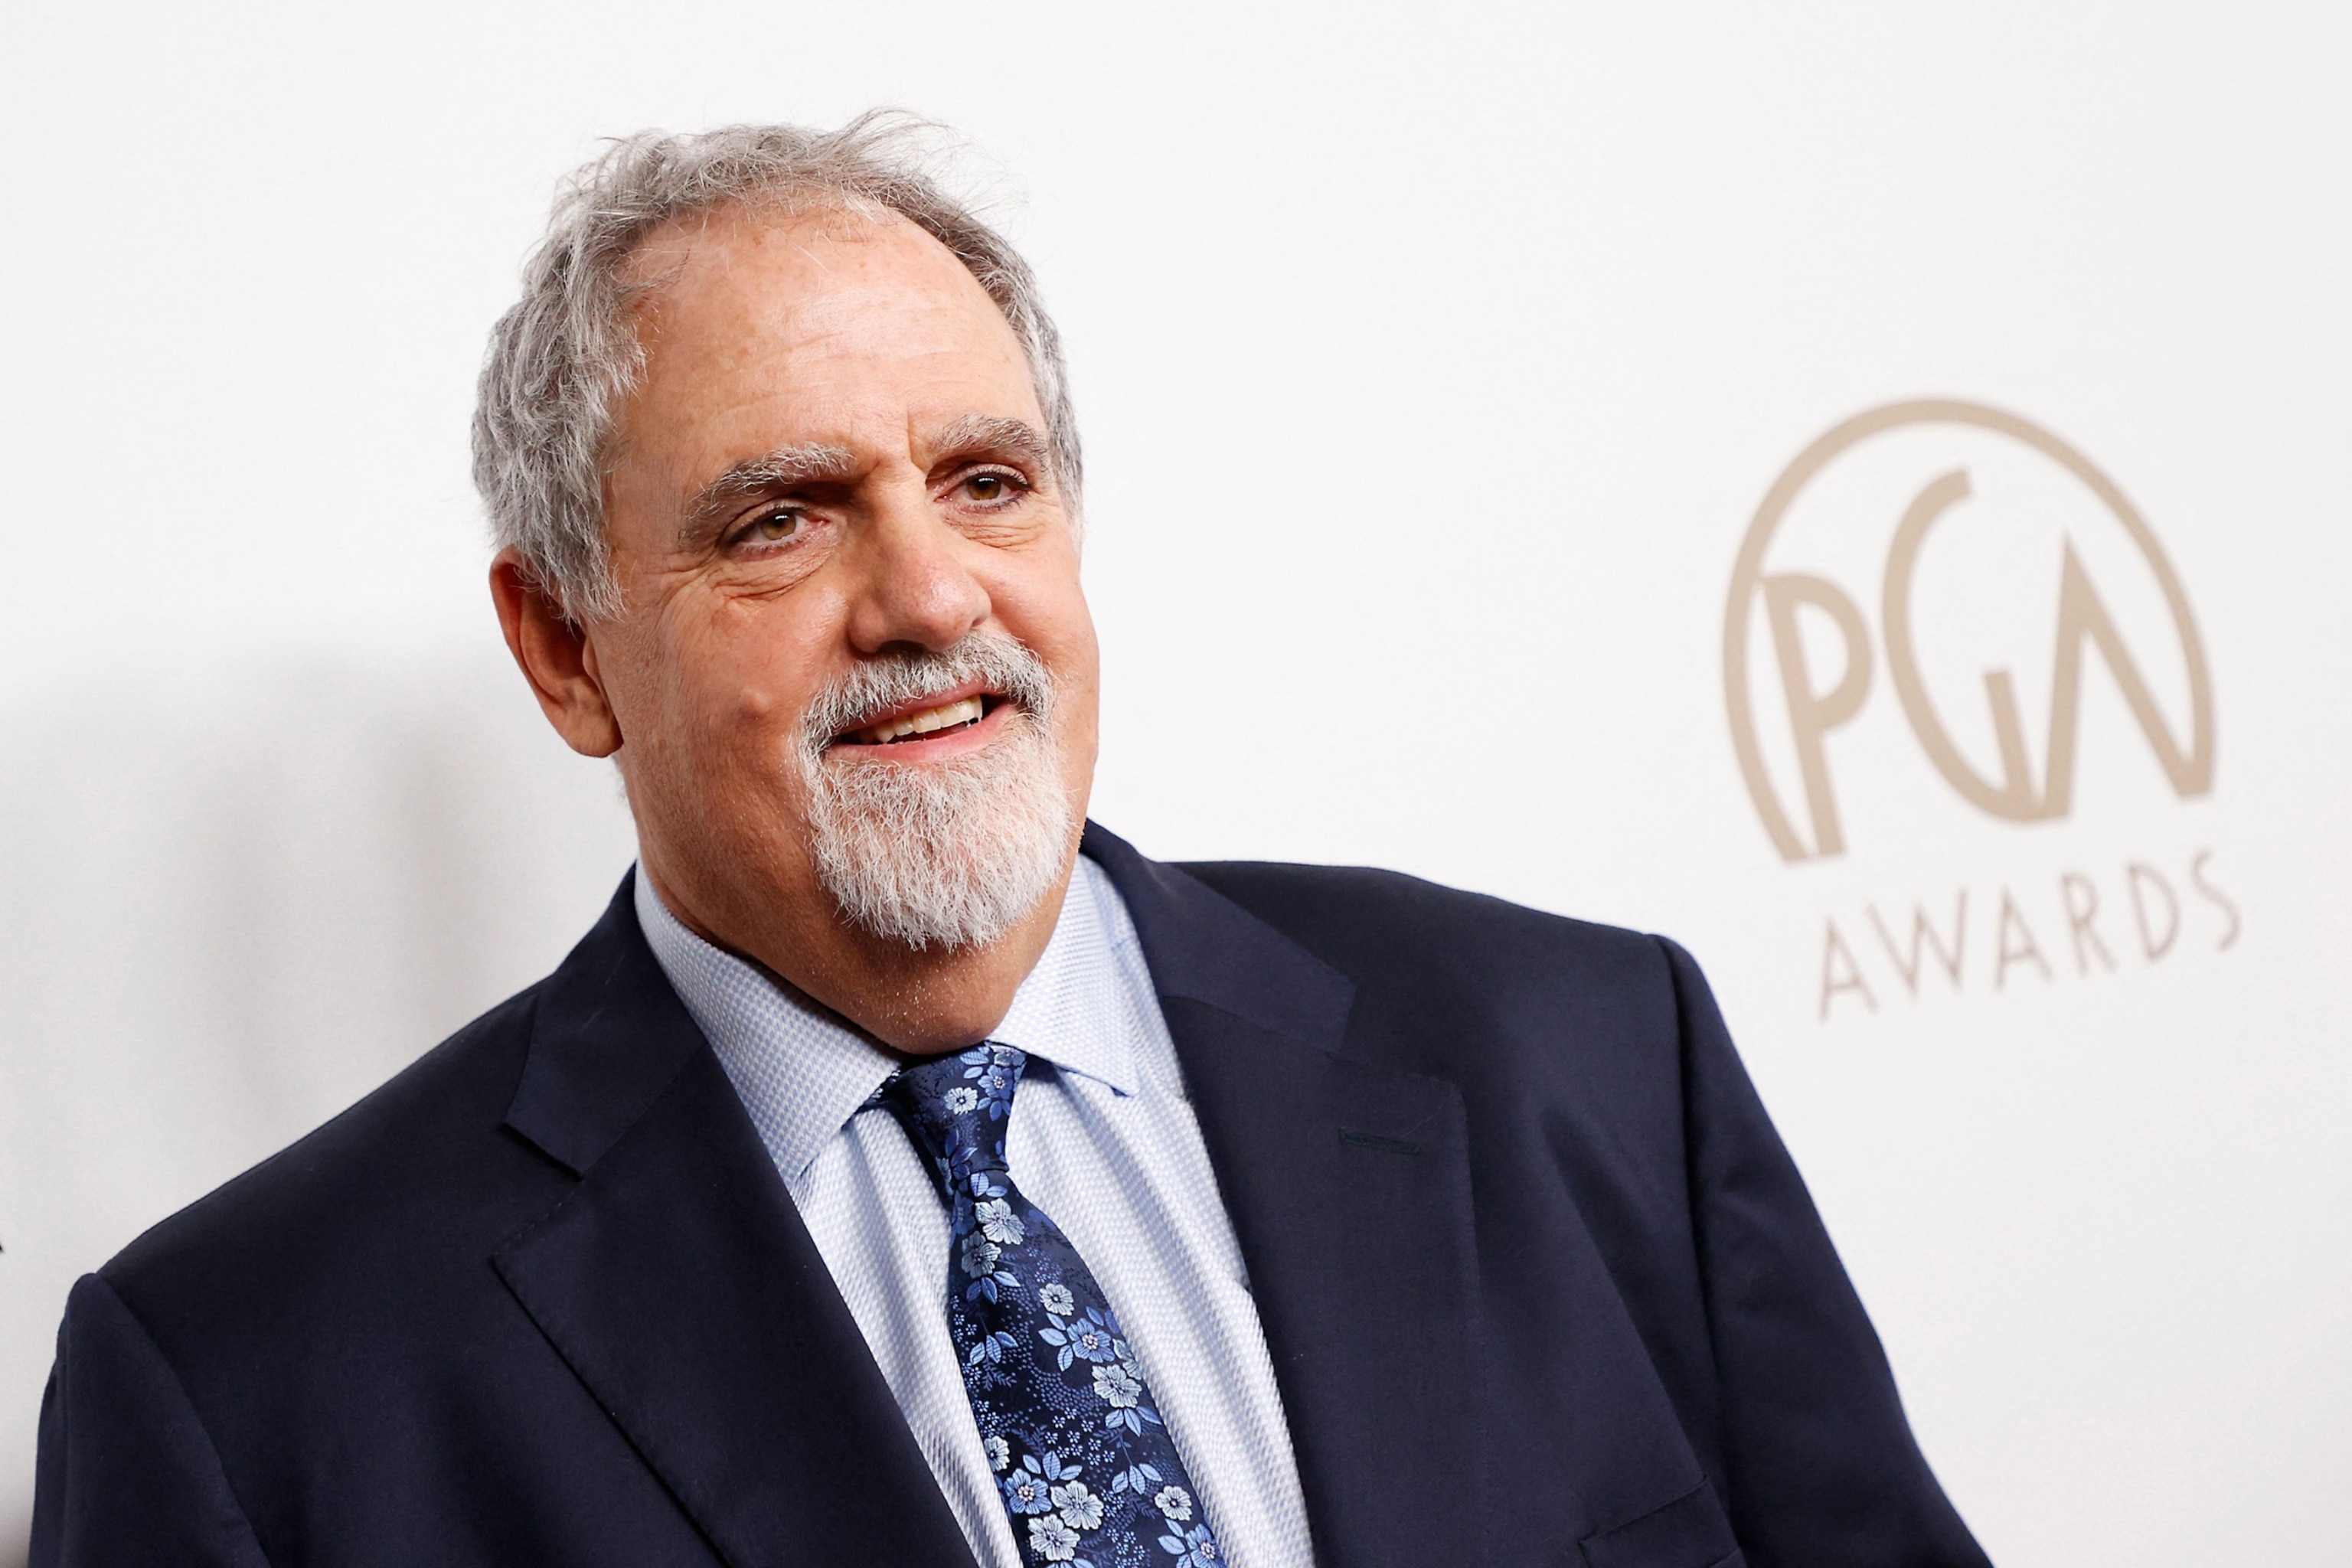 PHOTO: Producer Jon Landau arrives for the 34th Annual Producers Guild Awards (PGA) at the Beverly Hilton in Beverly Hills, Calif., on Feb. 25, 2023. 